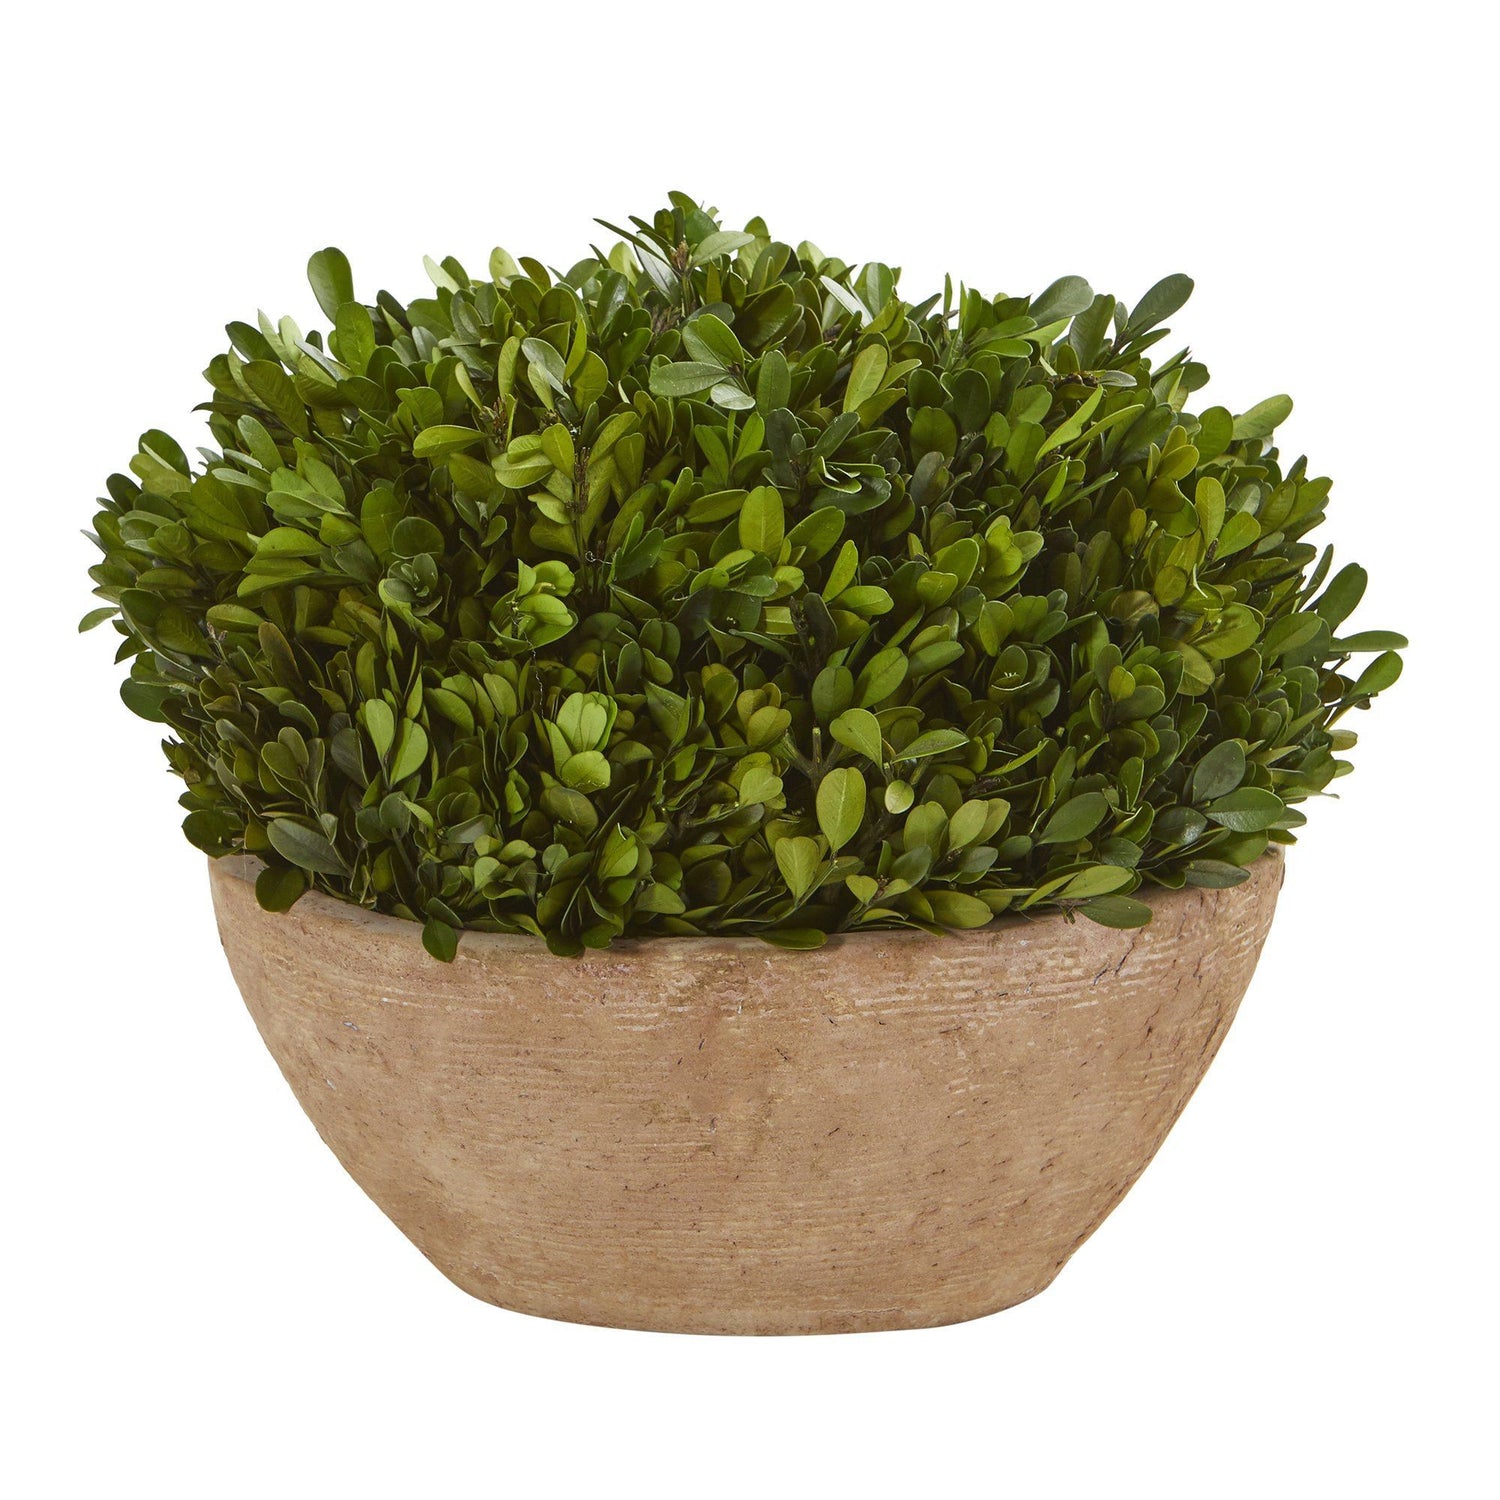 12” Boxwood Preserved Plant in Oval Planter